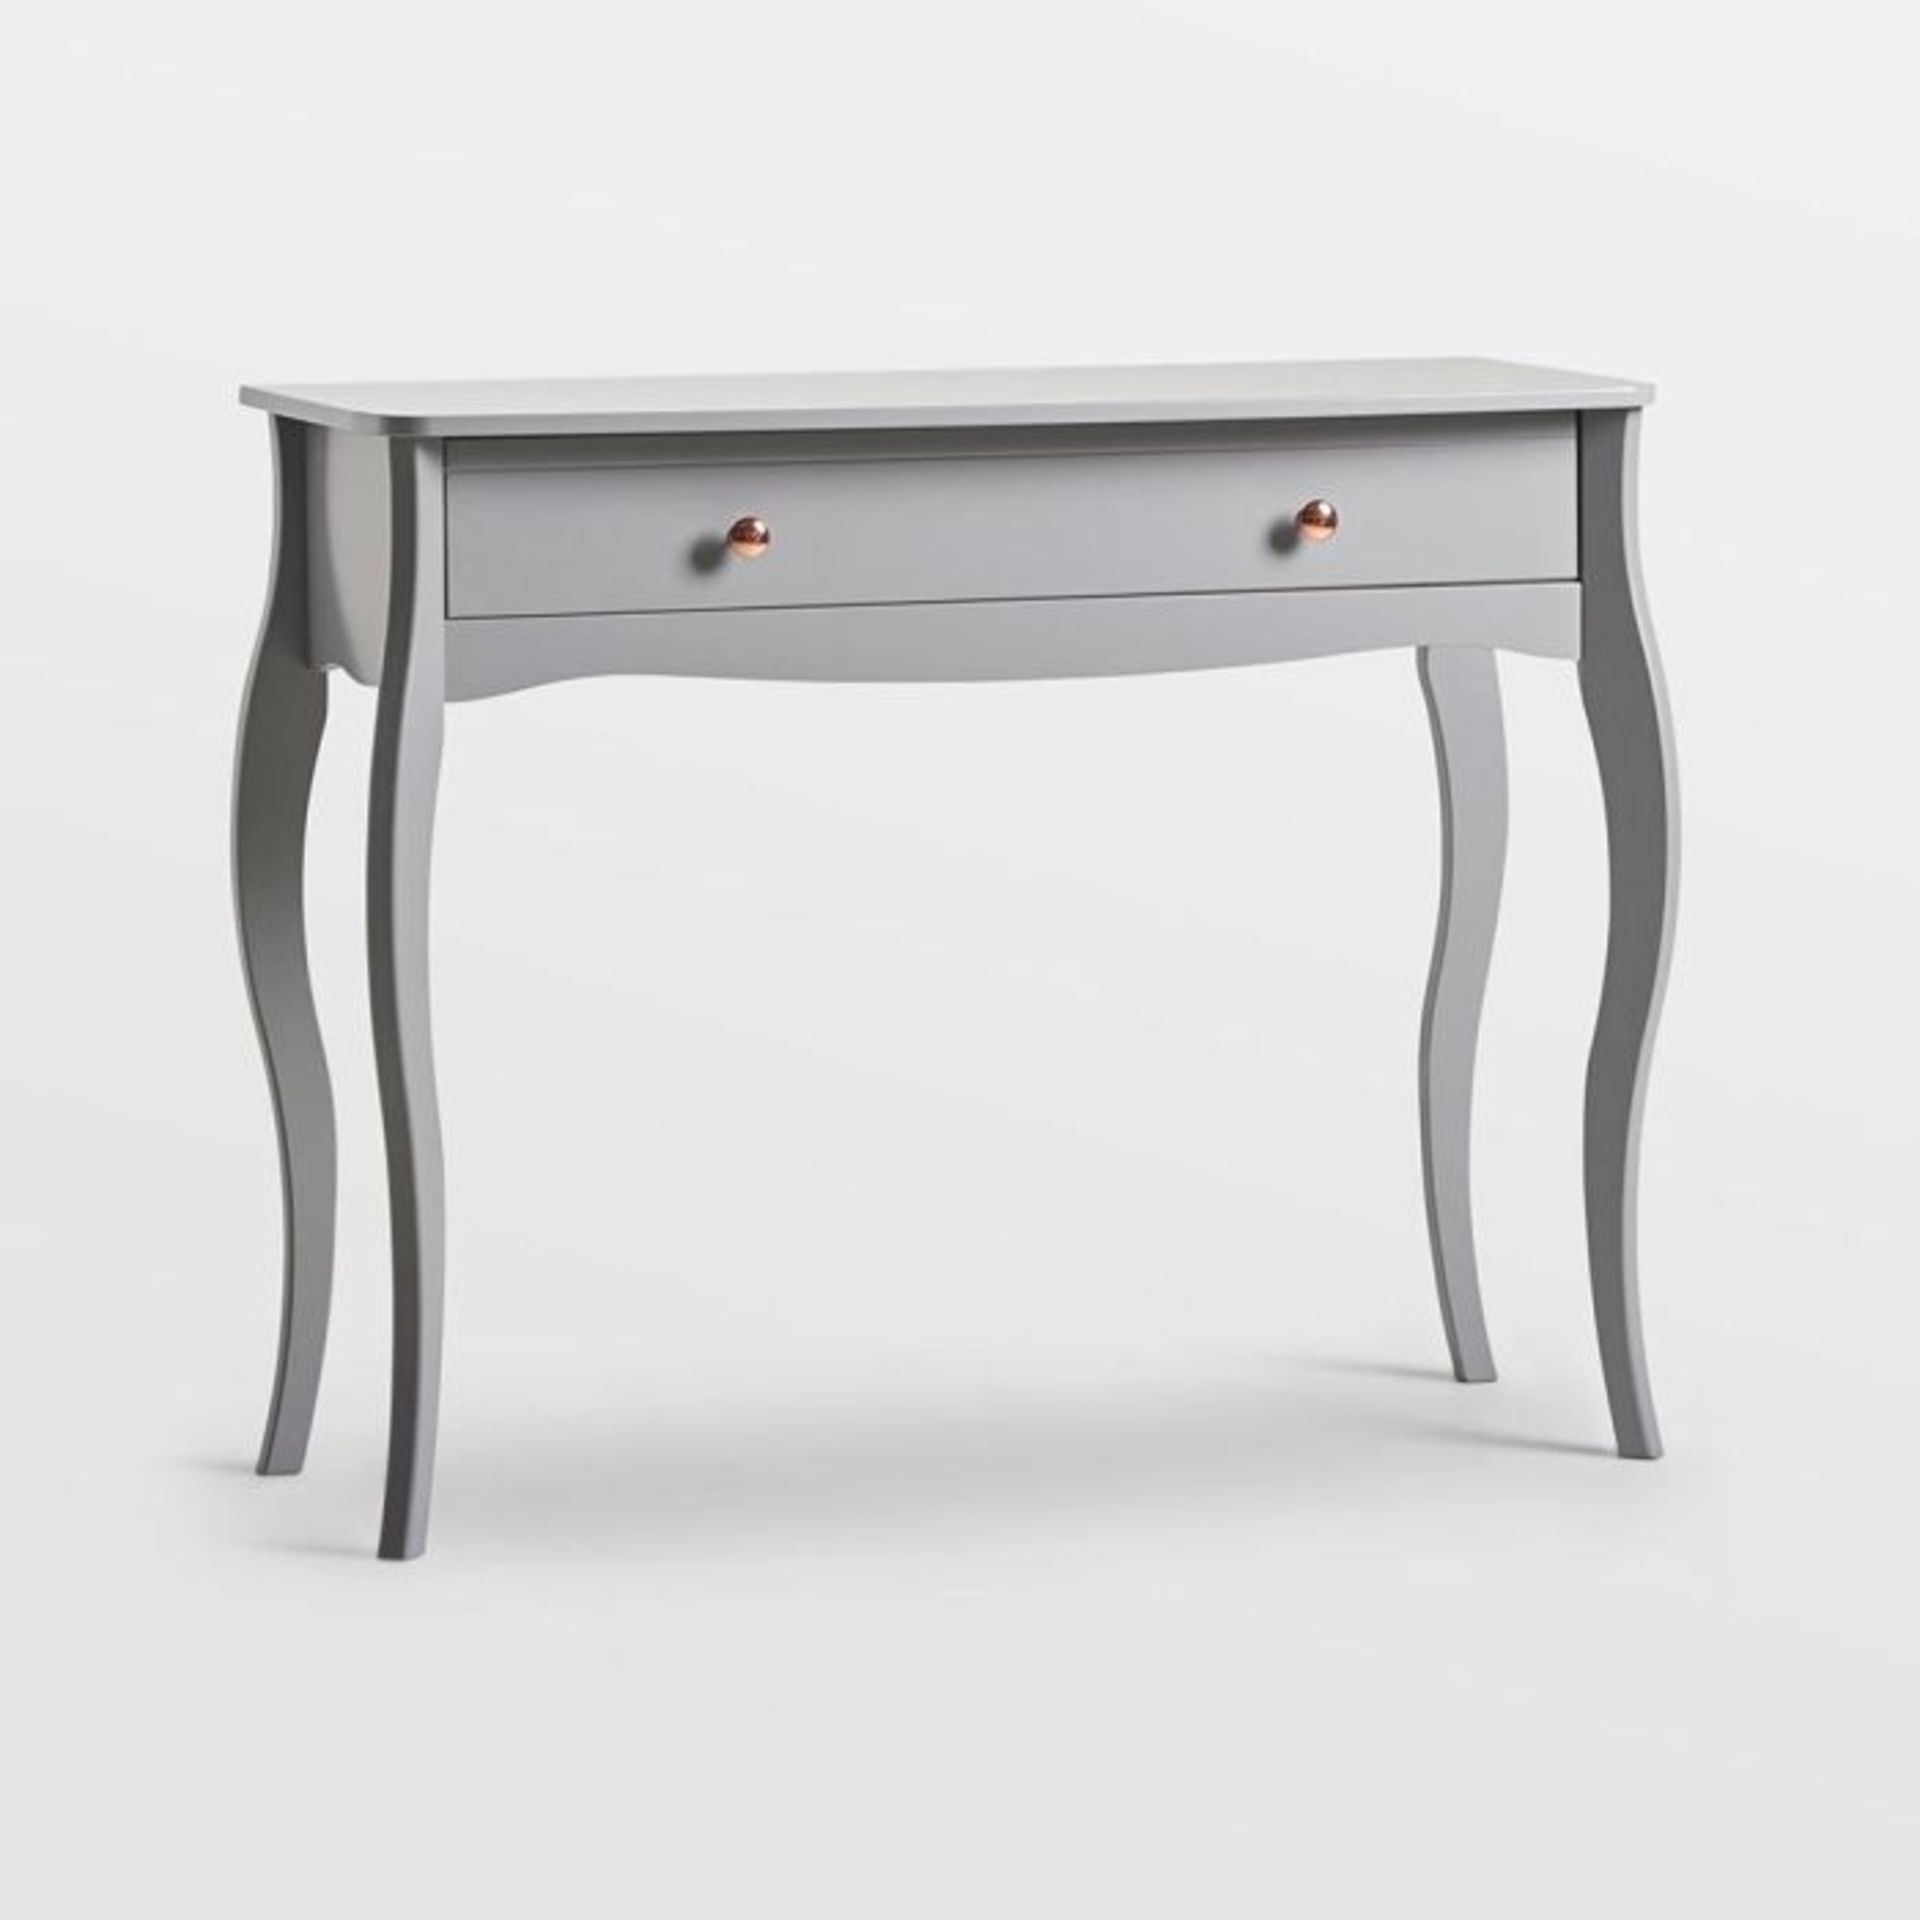 Grace Grey Dressing Table Desk. - ER36. With a cool grey finish, bold legwork contouring and